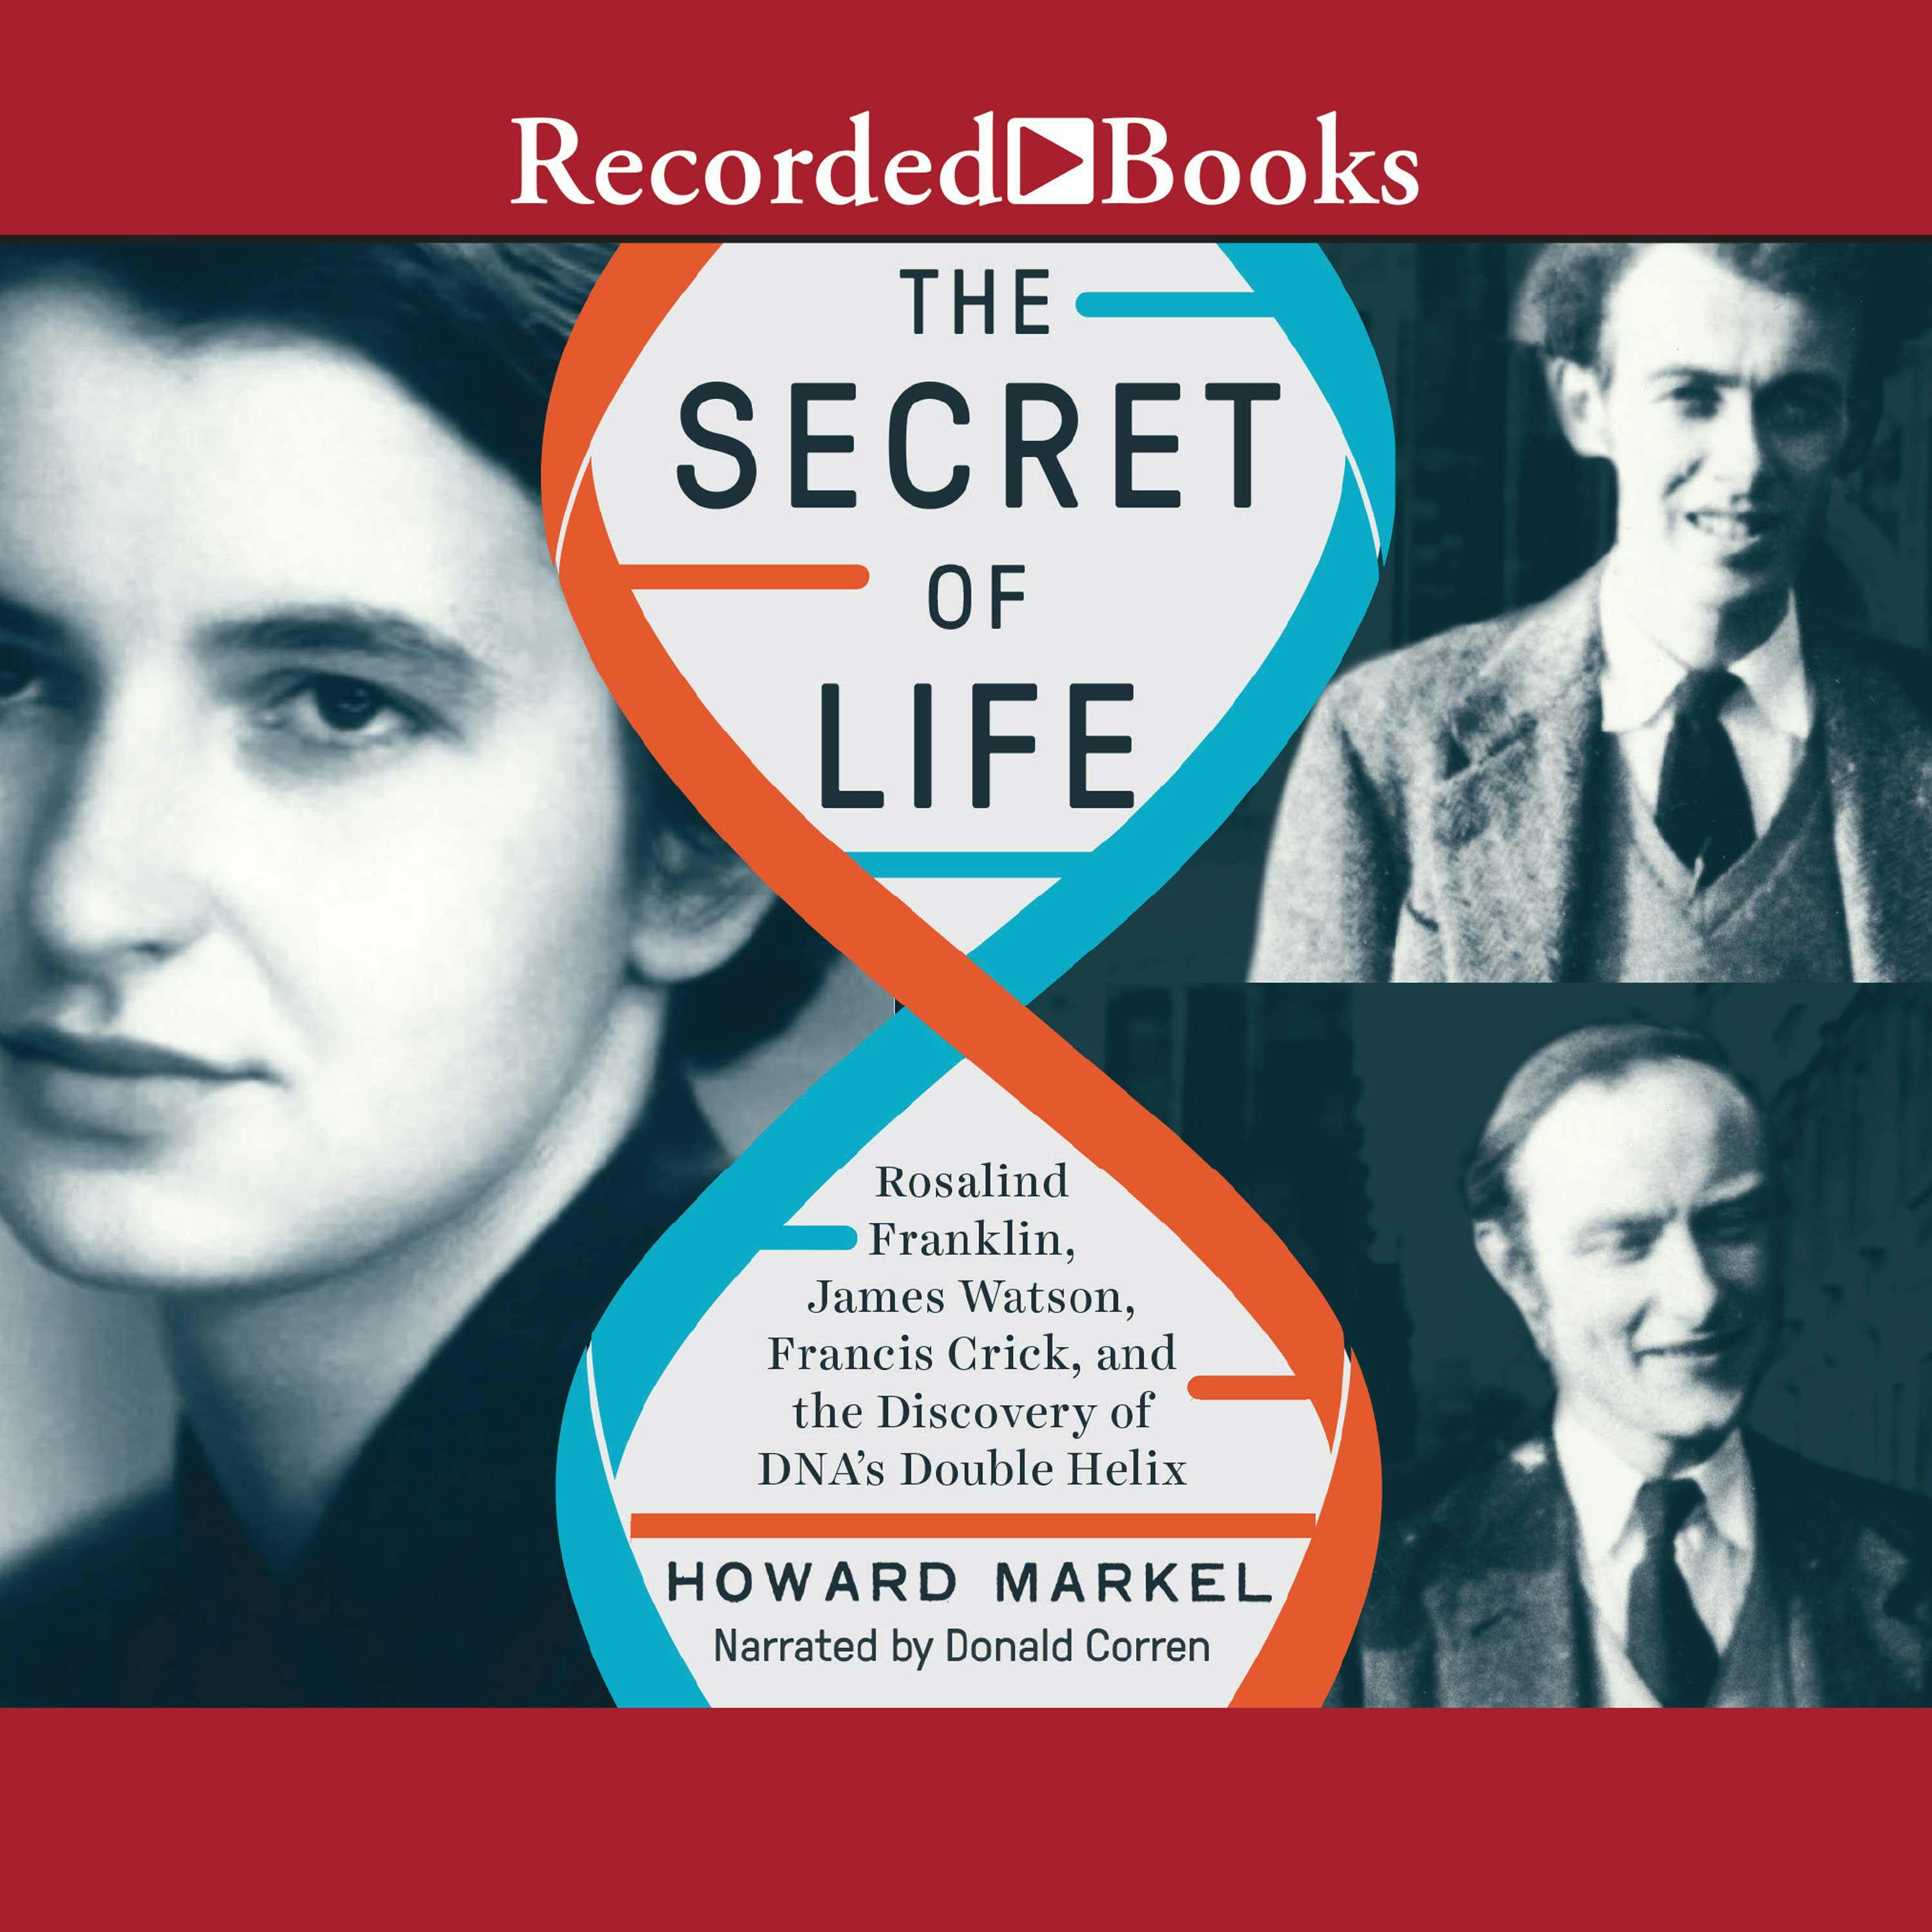 The Secret of Life: Rosalind Franklin, James Watson, Francis Crick, and the Discovery of DNA's Double Helix - Howard Markel